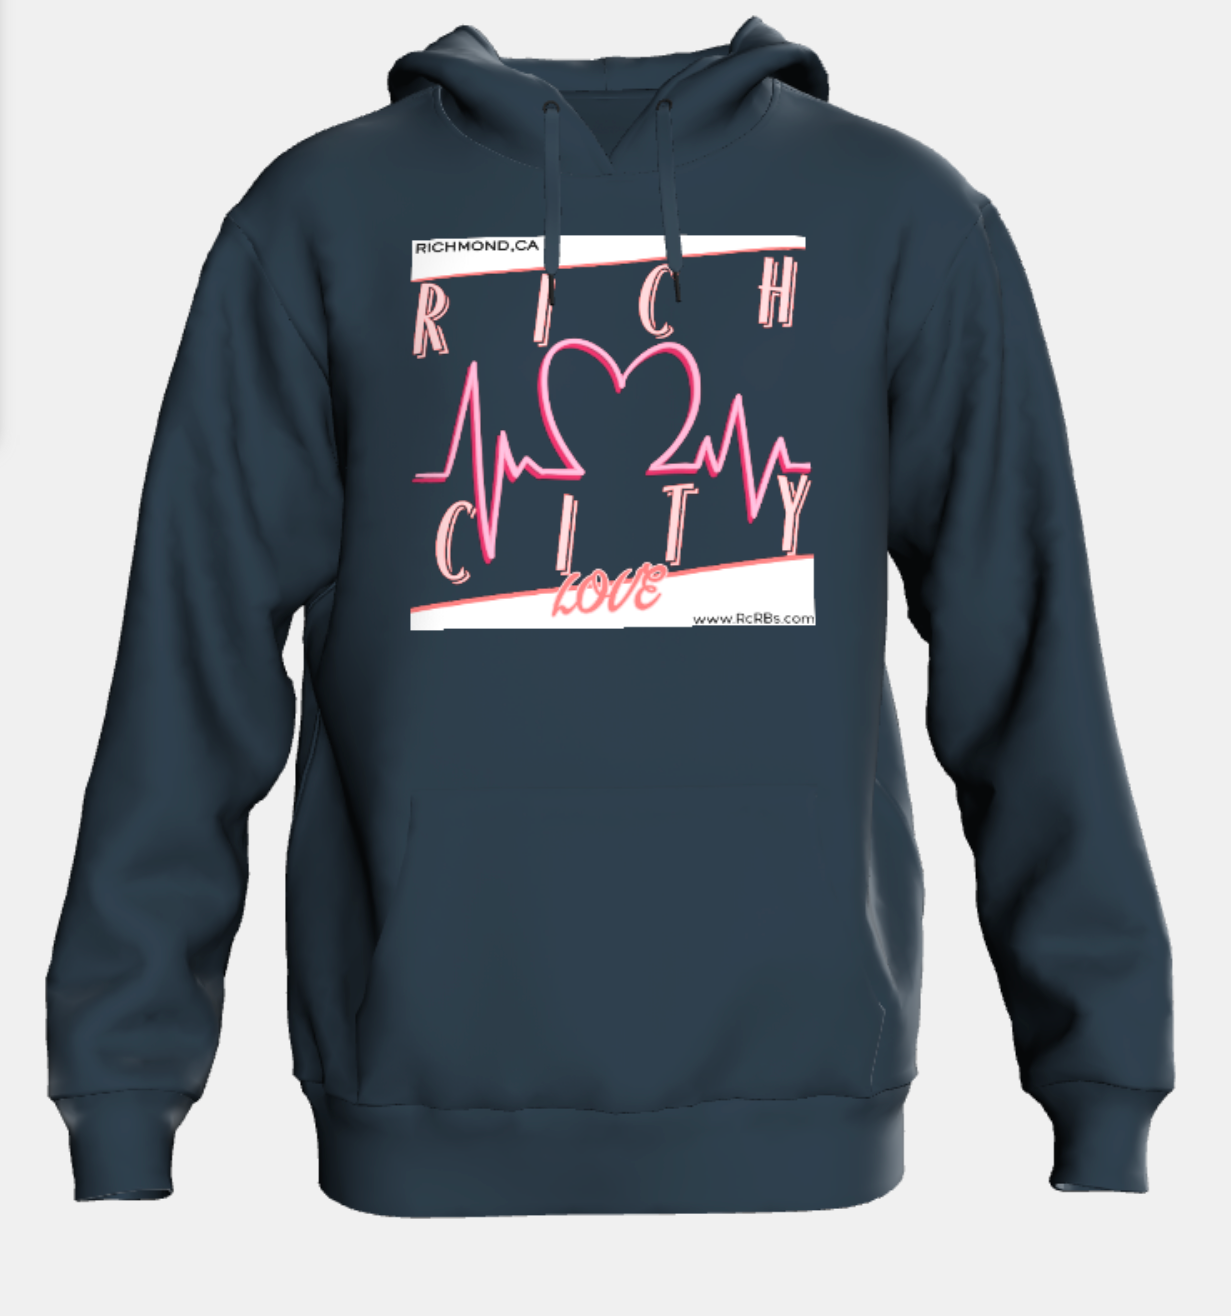 New 2023 RichCity Rides Bike/Skate Cooperative -"LOVE" hoodie - Sustainable Clothing Collection